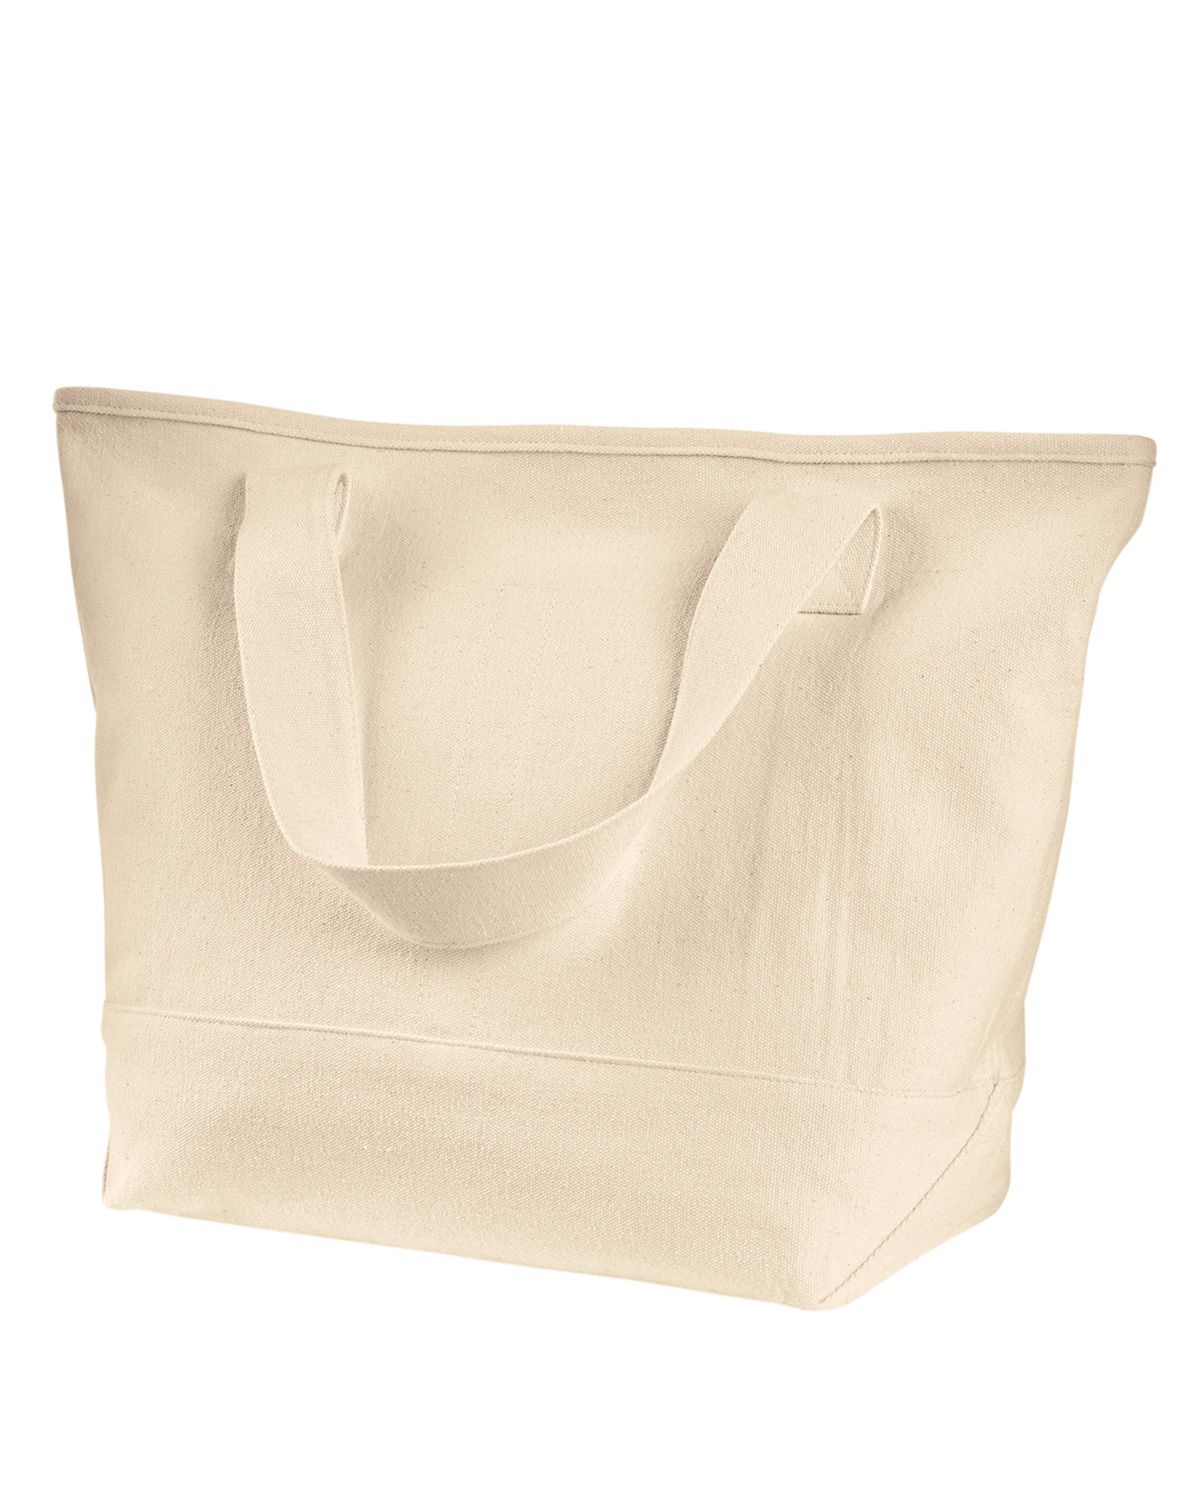 Bagedge BE258 Bottle Tote - Shop at ApparelnBags.com